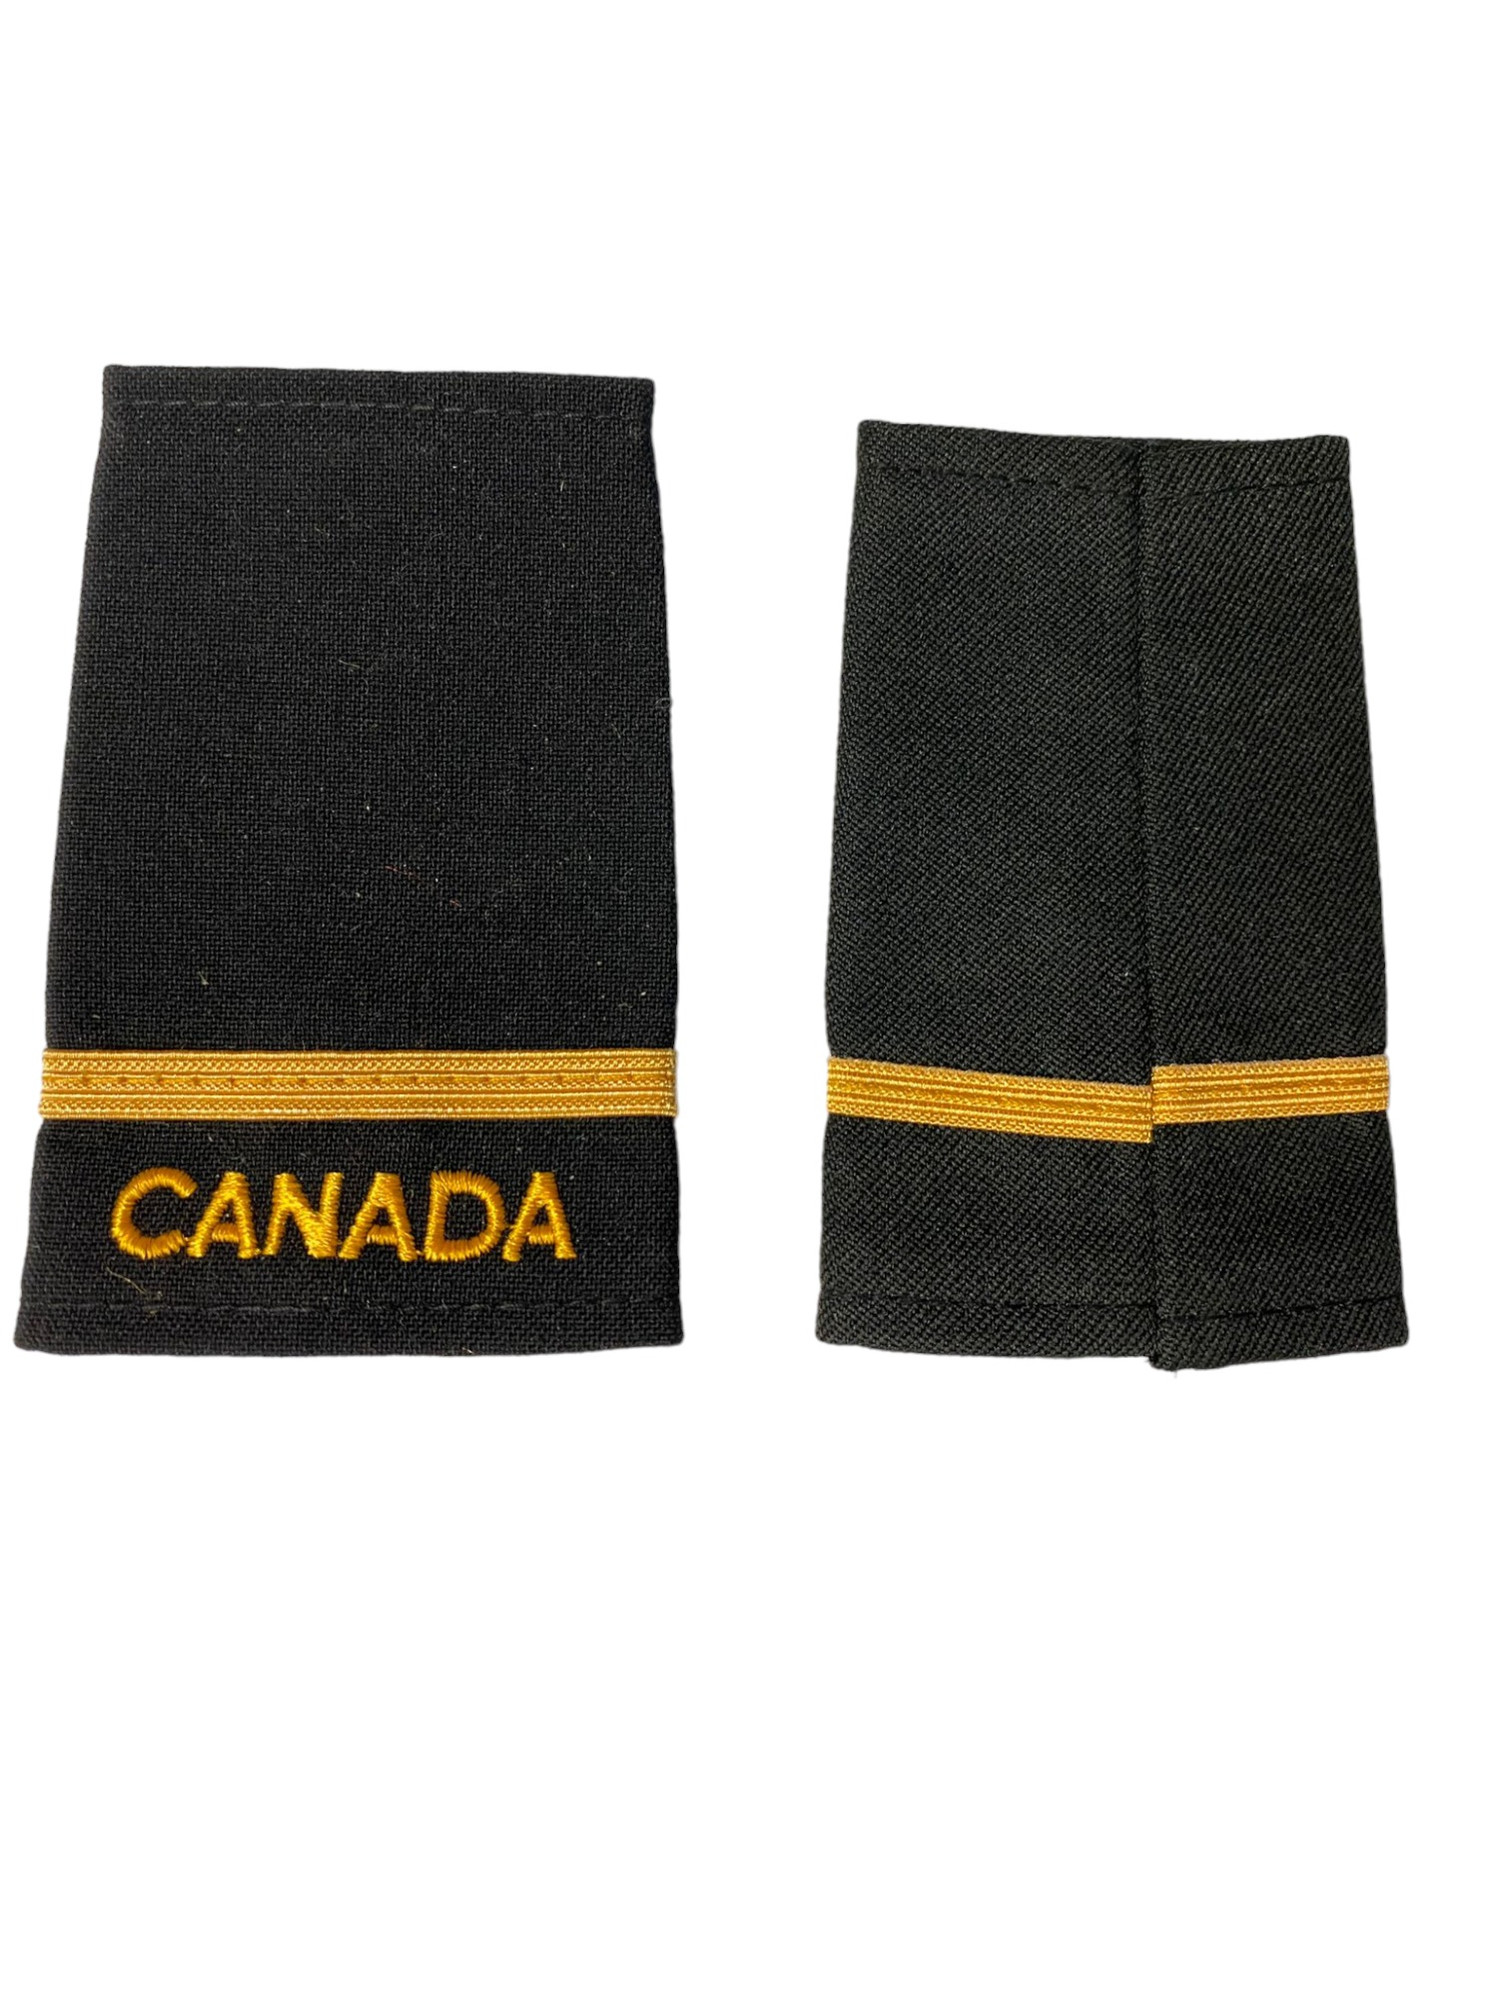 Canadian Armed Forces Rank Epaulets Navy - Naval Cadet